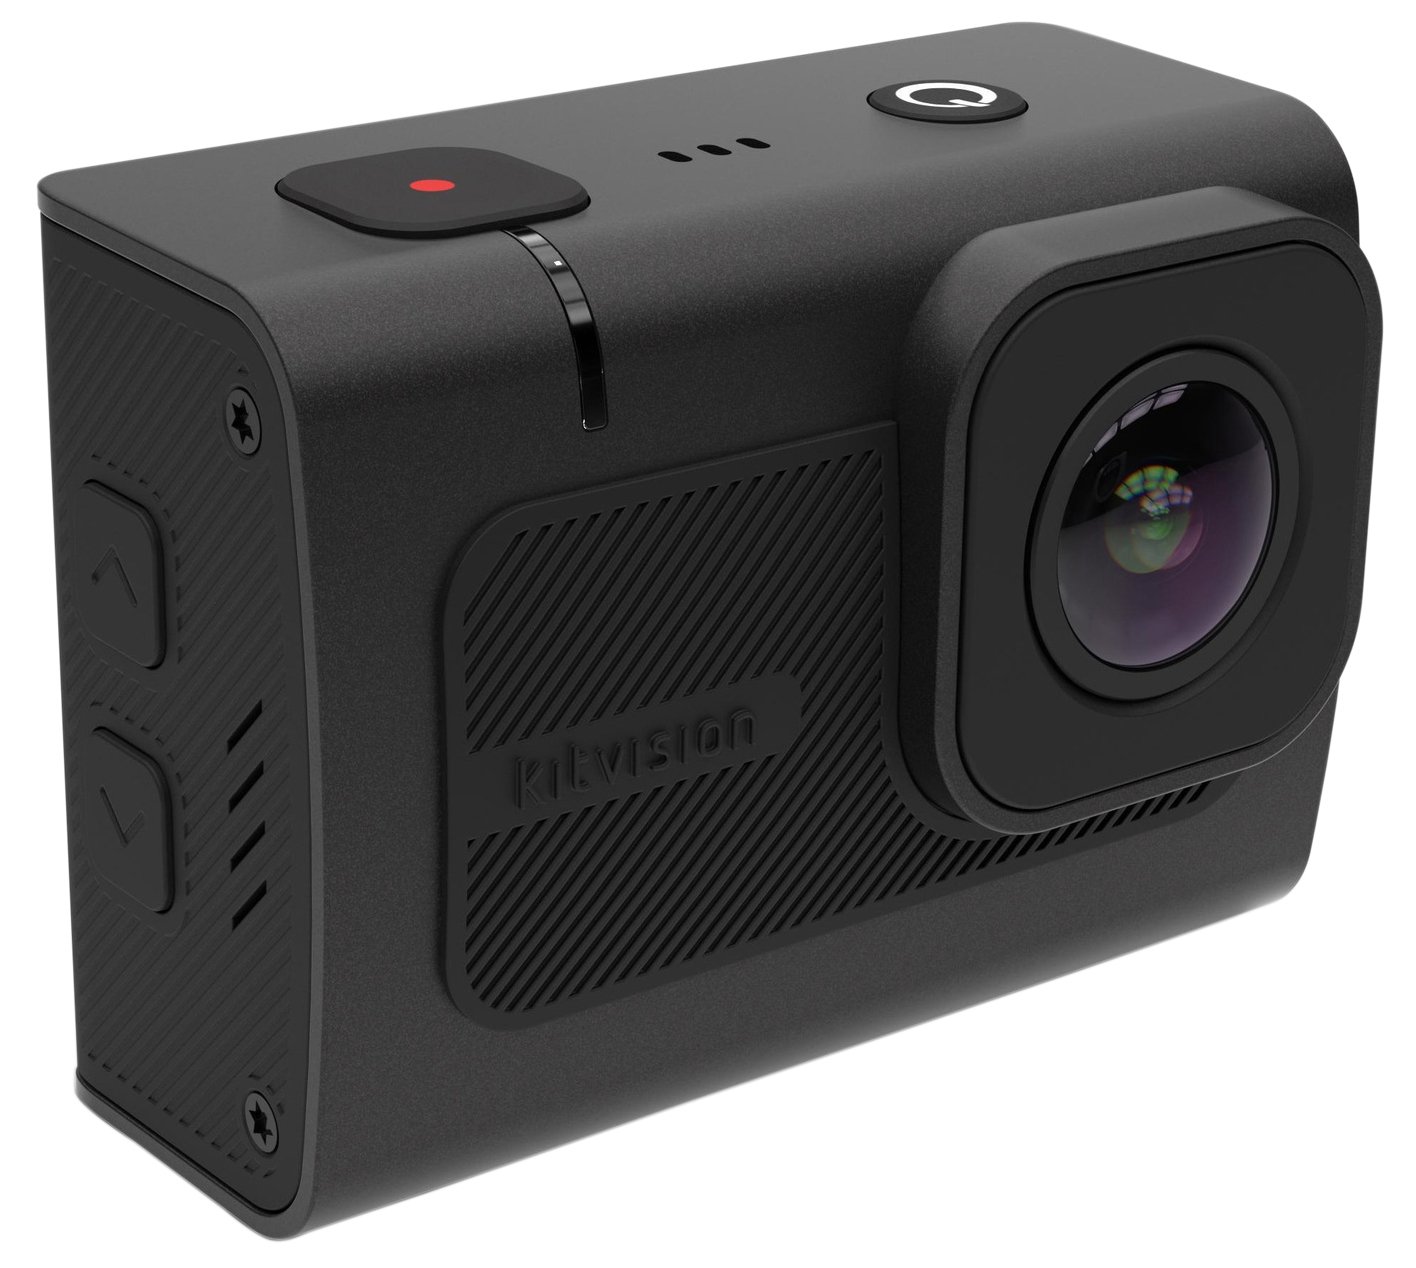 Kitvision Venture 4K Action Camera with Wi-Fi Review